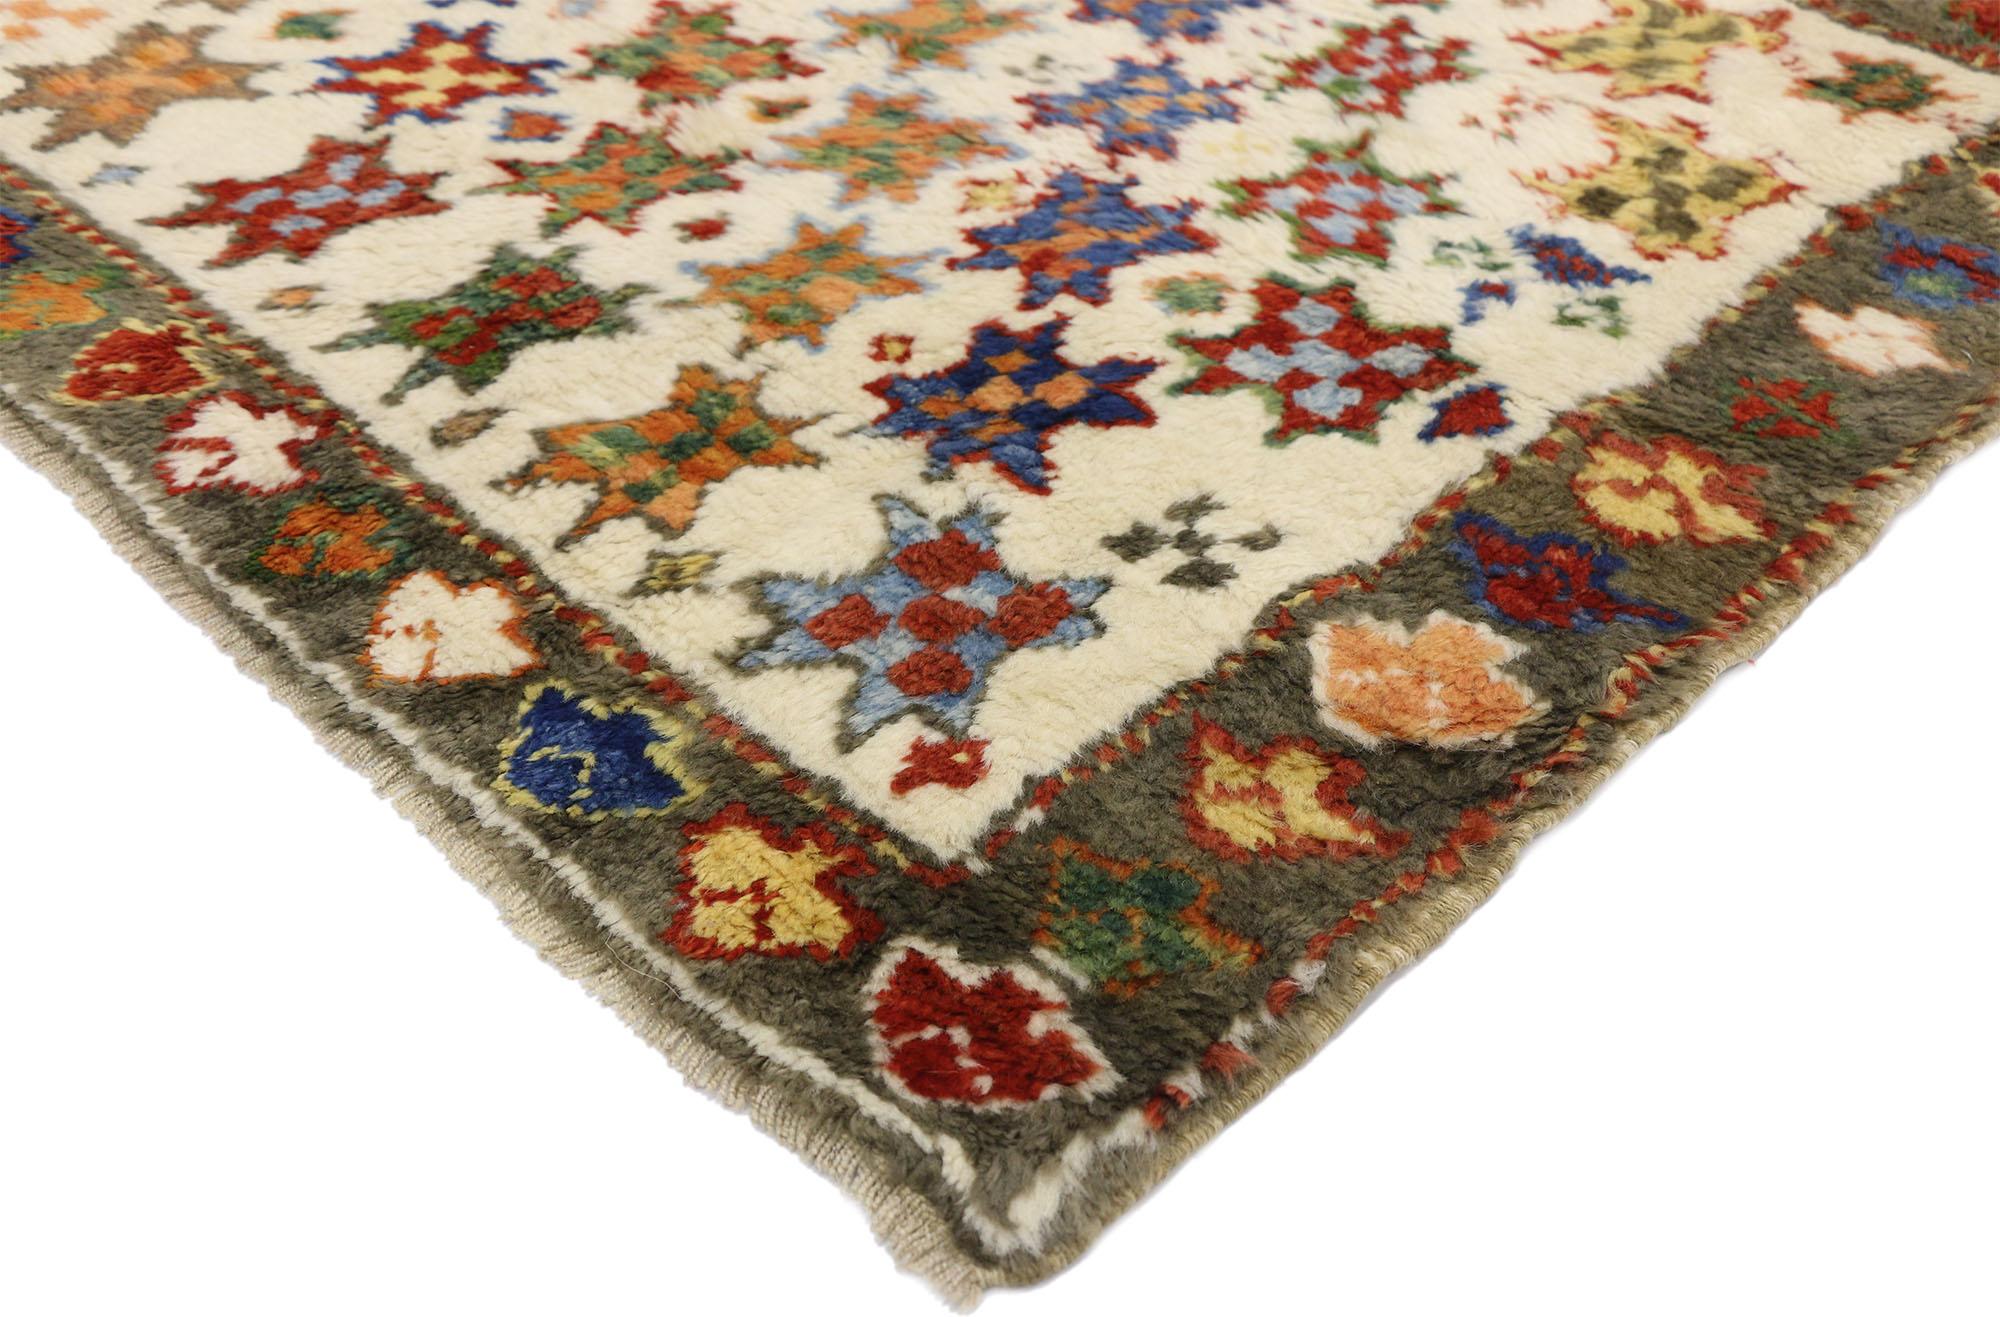 52447, vintage Turkish Oushak rug with Boho Tribal style. This hand knotted wool vintage Turkish Oushak rug with Boho Tribal style features a poly-chromatic field of eight-pointed stars representing happiness in a myriad of colors arranged in